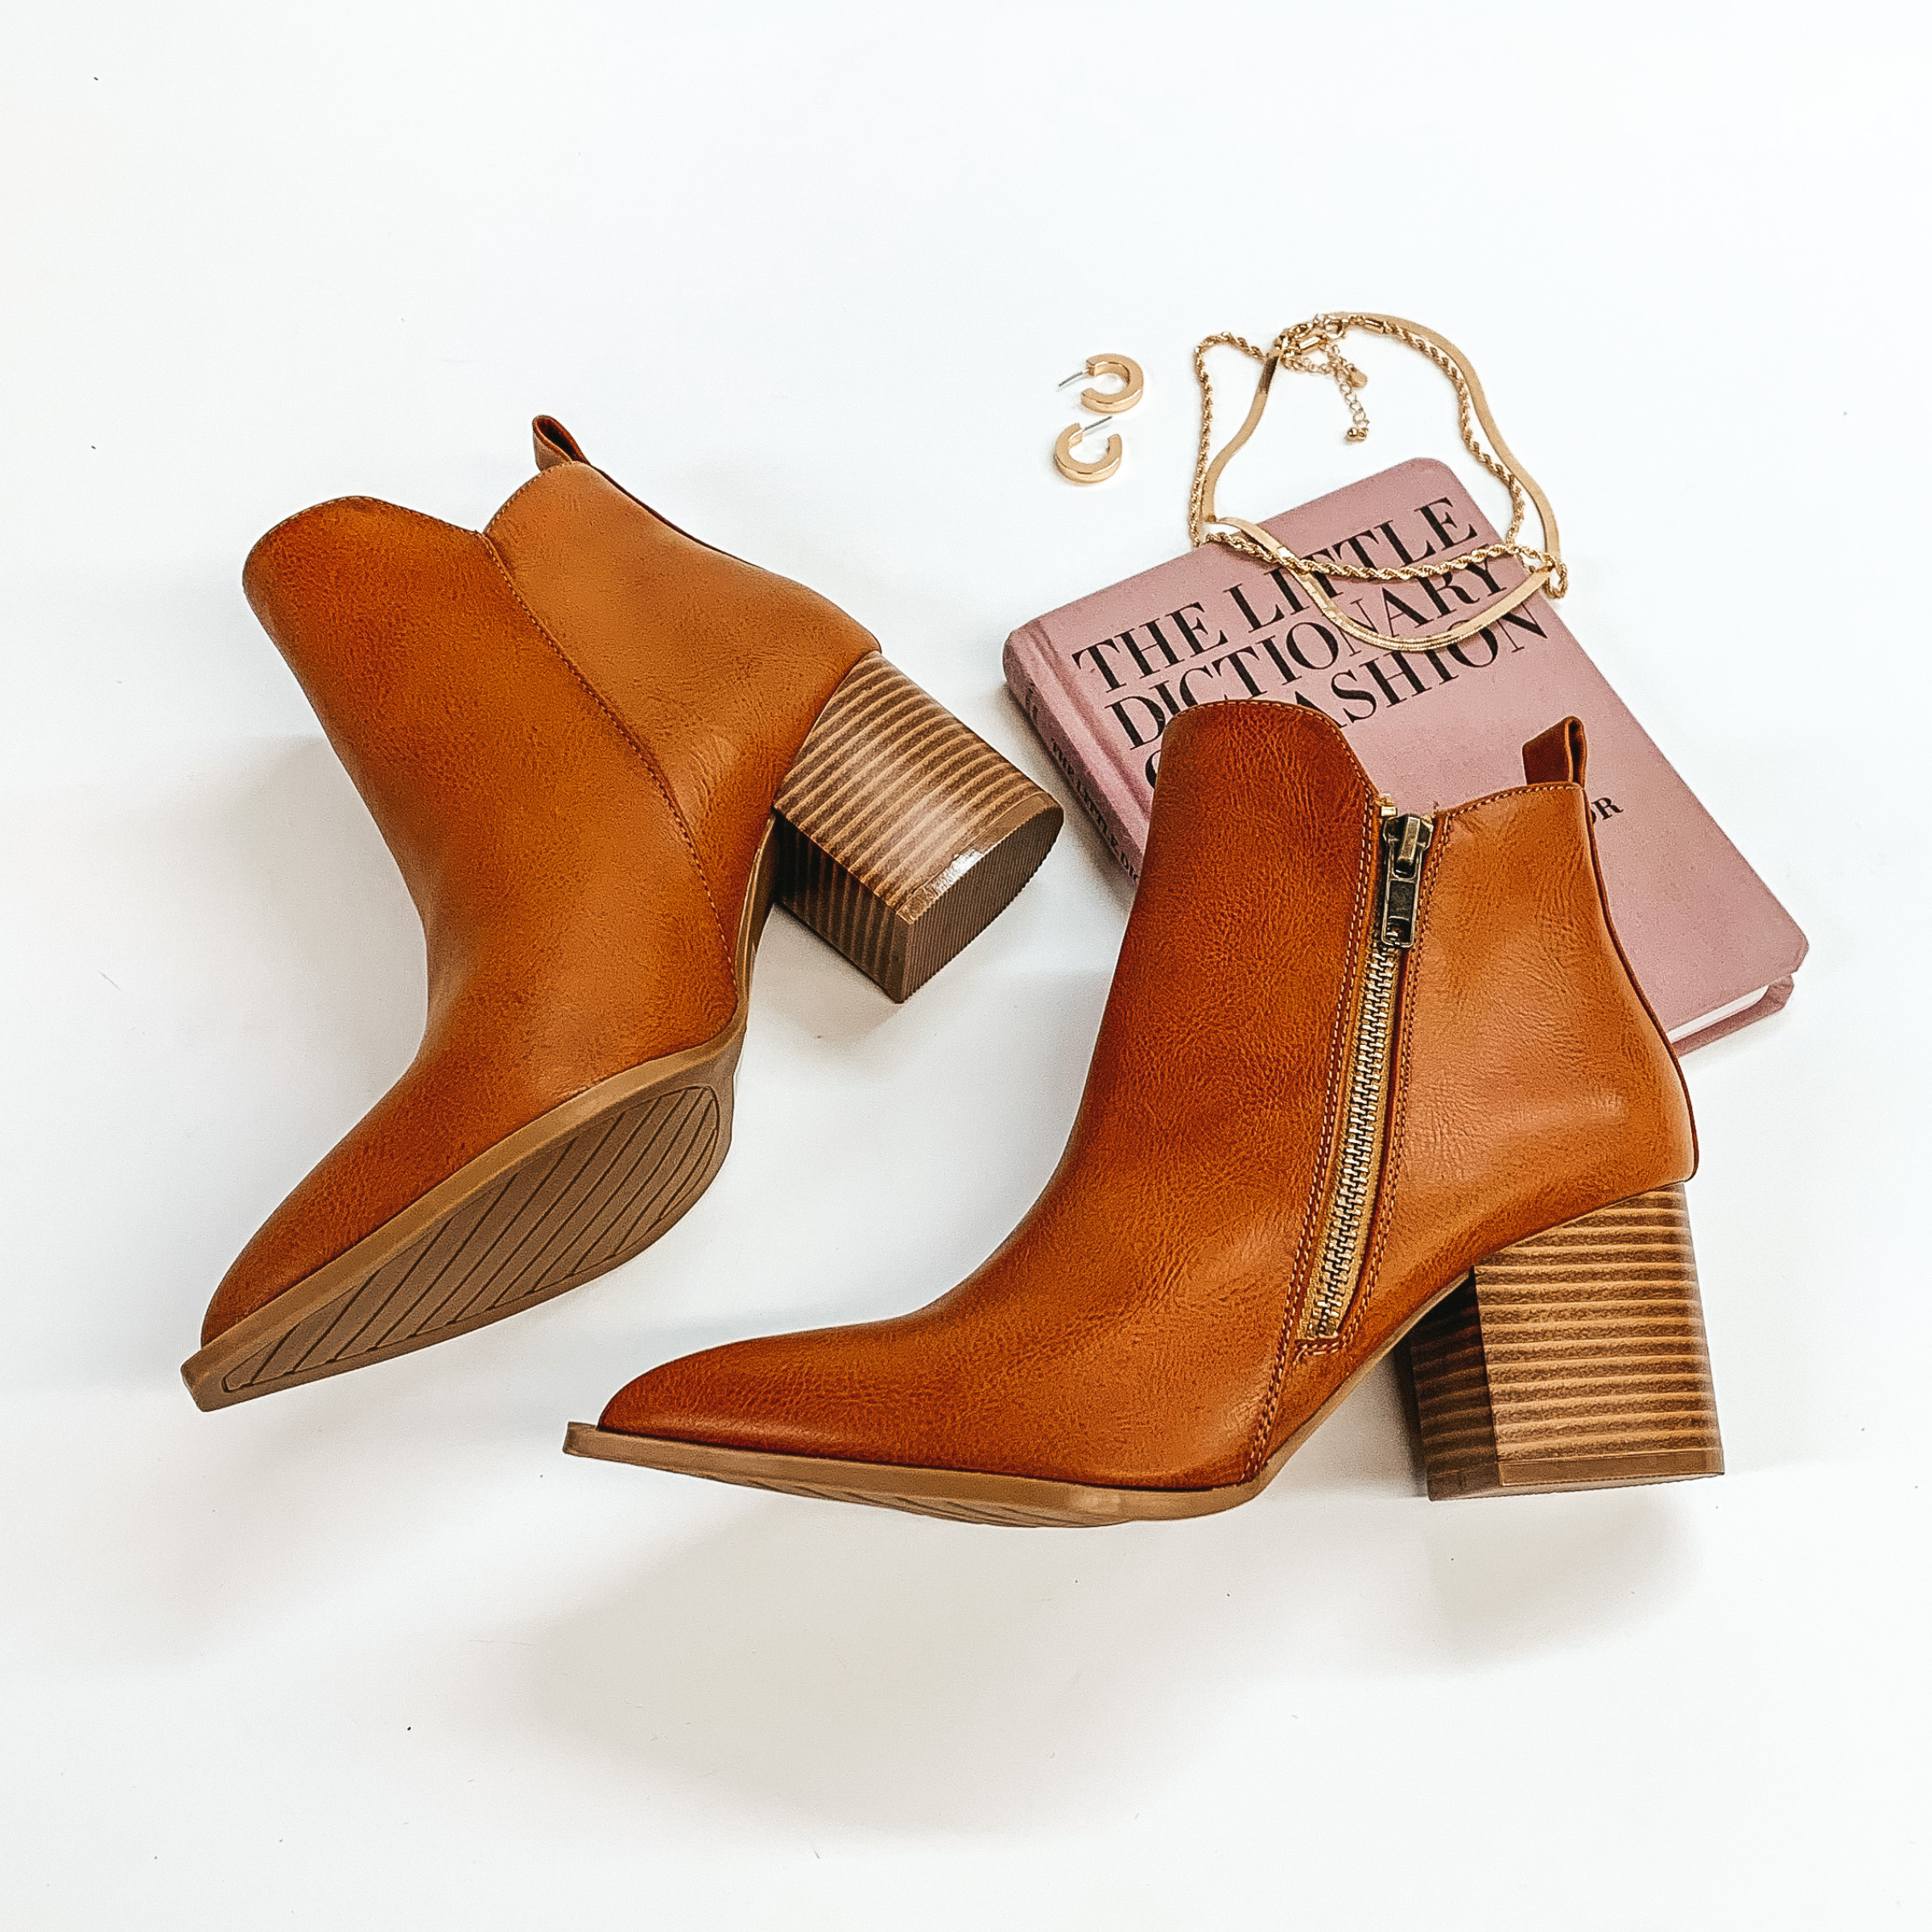 Ankle booties in cognac with a side zipper. These booties also have a wooden heel. These booties are pictured on a white background with gold jewelry and a book.  